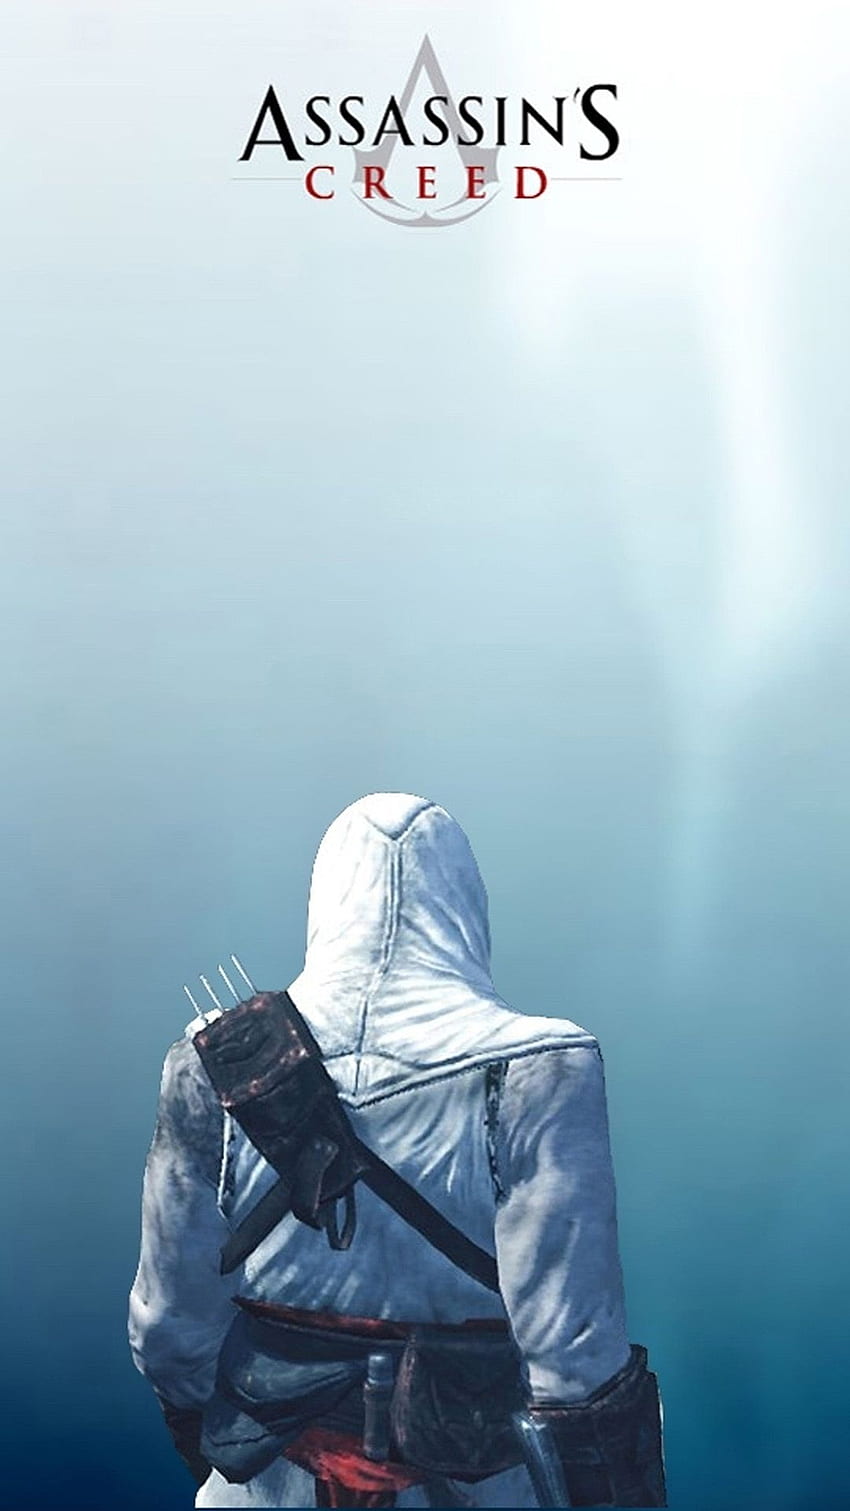 1920x1080px 1080p Free Download Iphone 6 Plus Assassins Creed 02 Assassins Creed Soldiers 